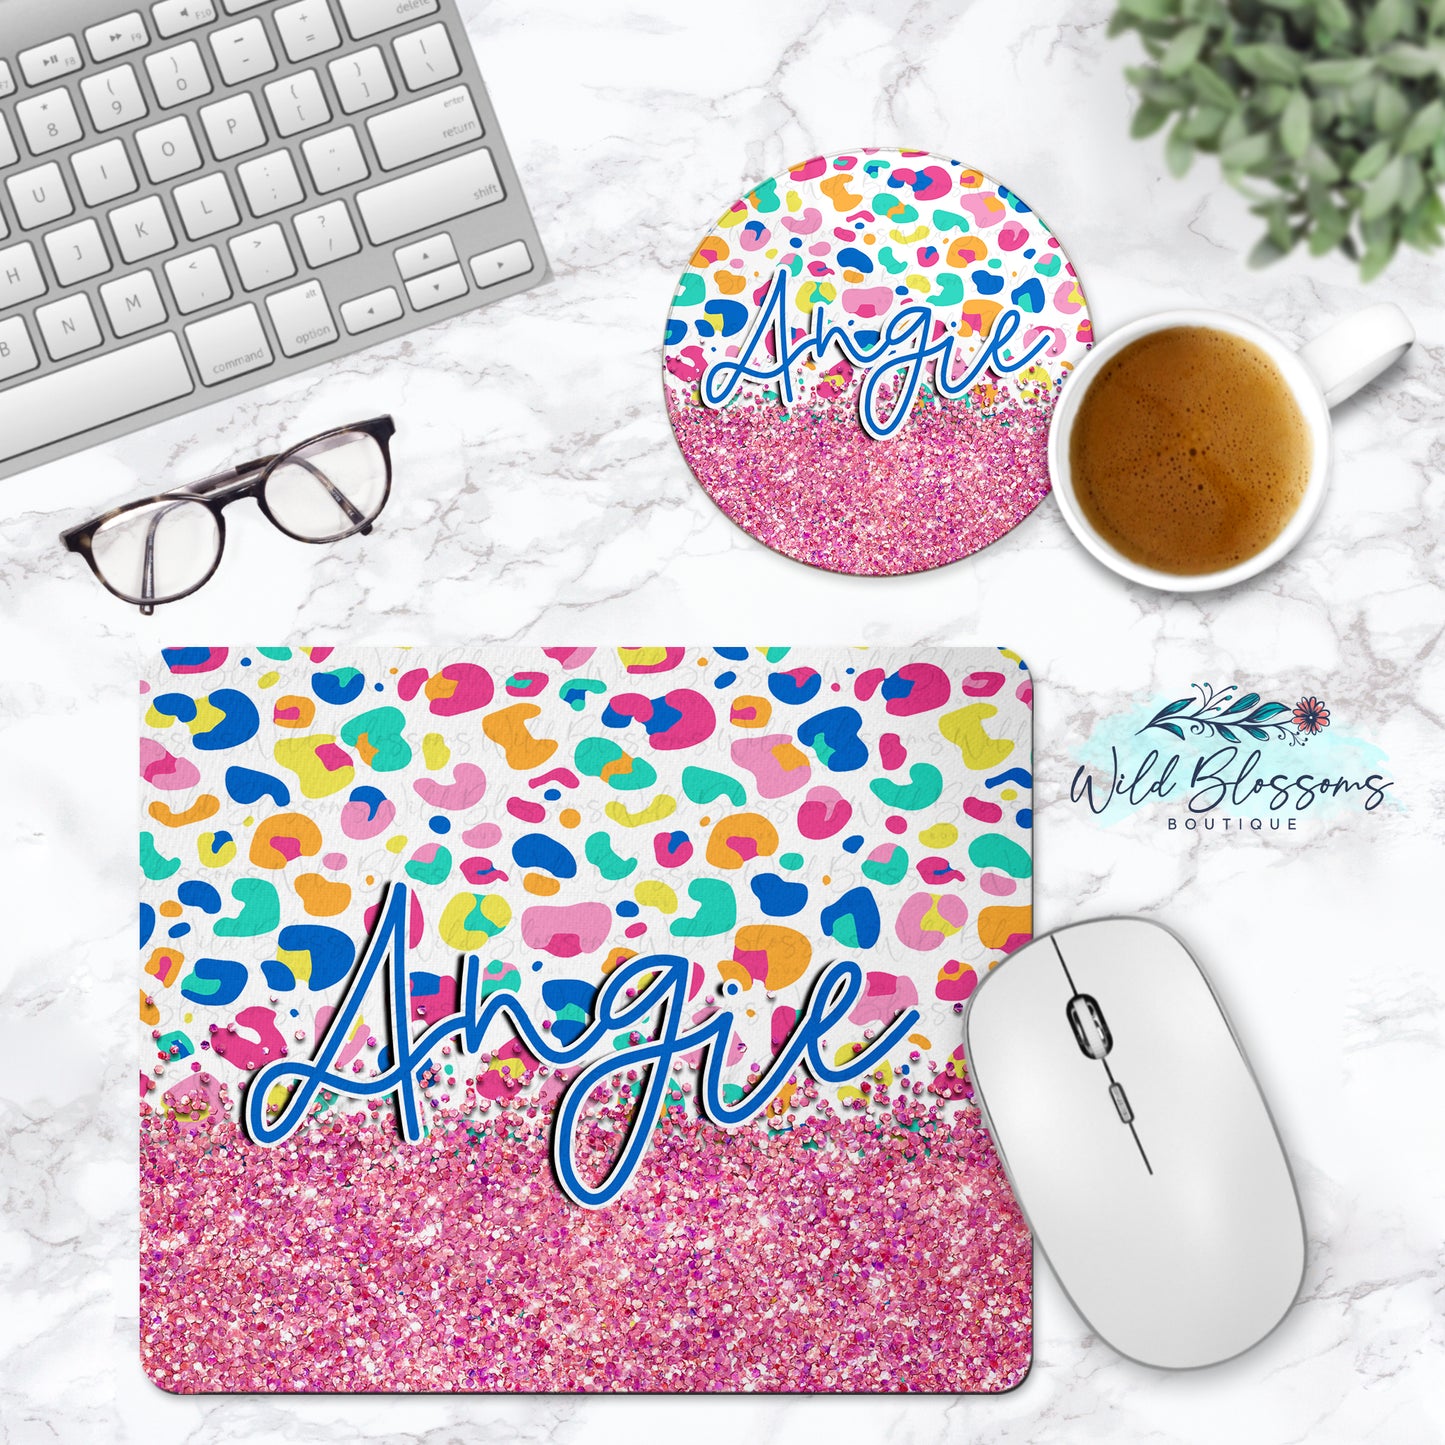 Colorful Leopard Print Personalized Mouse Pad And Coaster Desk Set